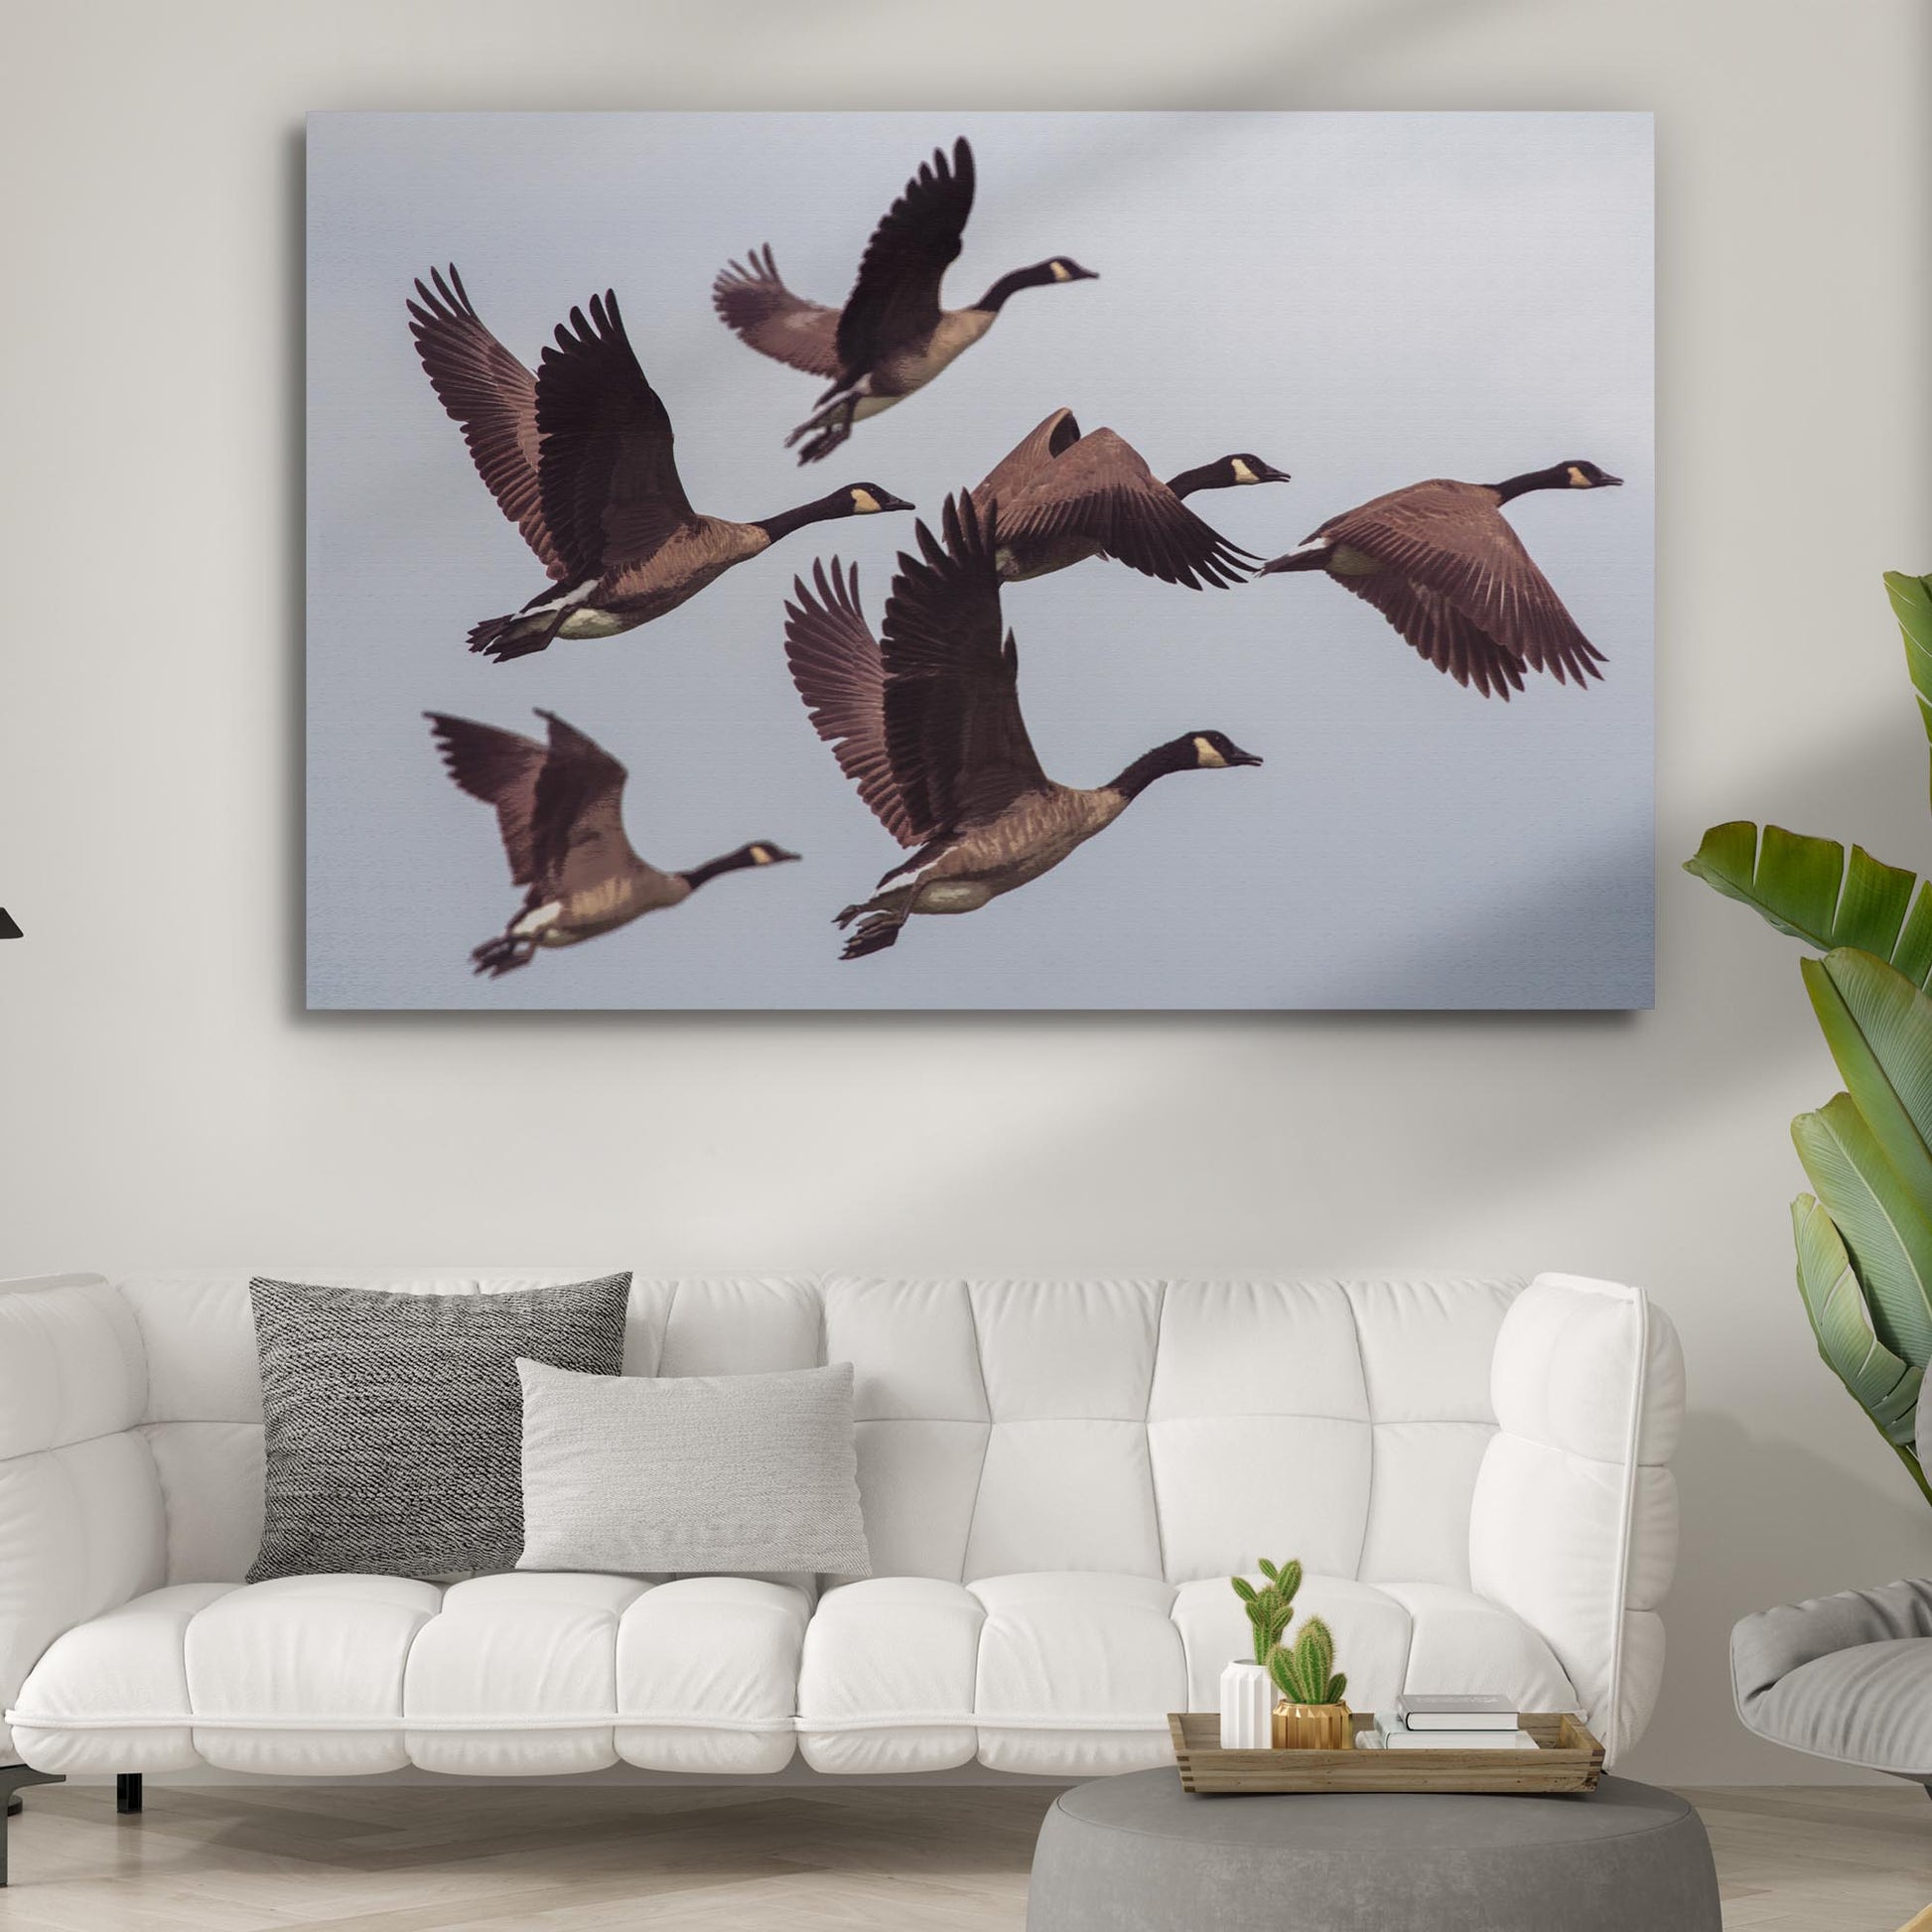 Canadian Geese Canvas Wall Art - Image by Tailored Canvases